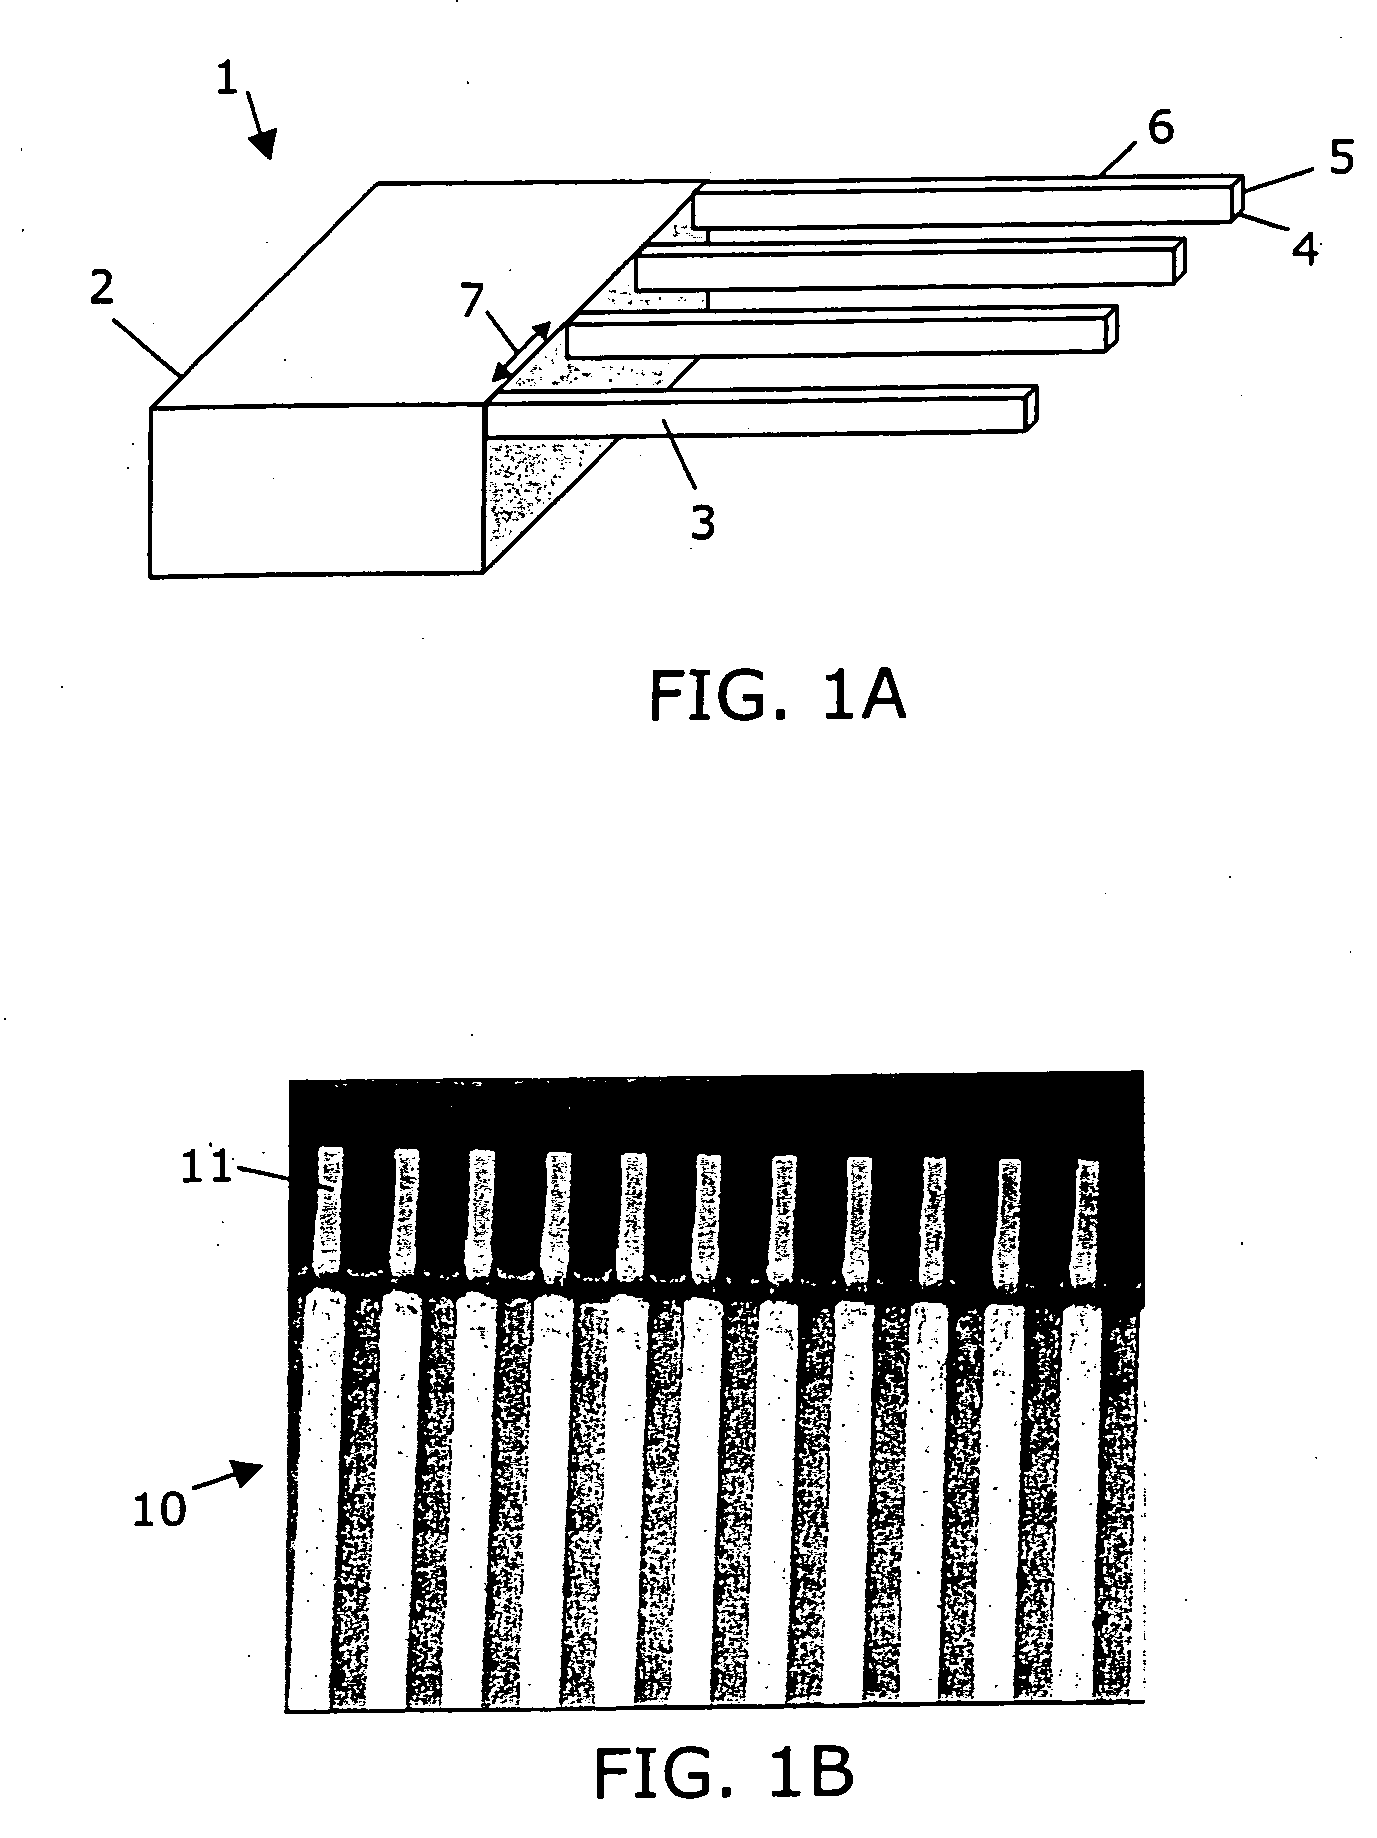 Polymer-based cantilever array with optical readout